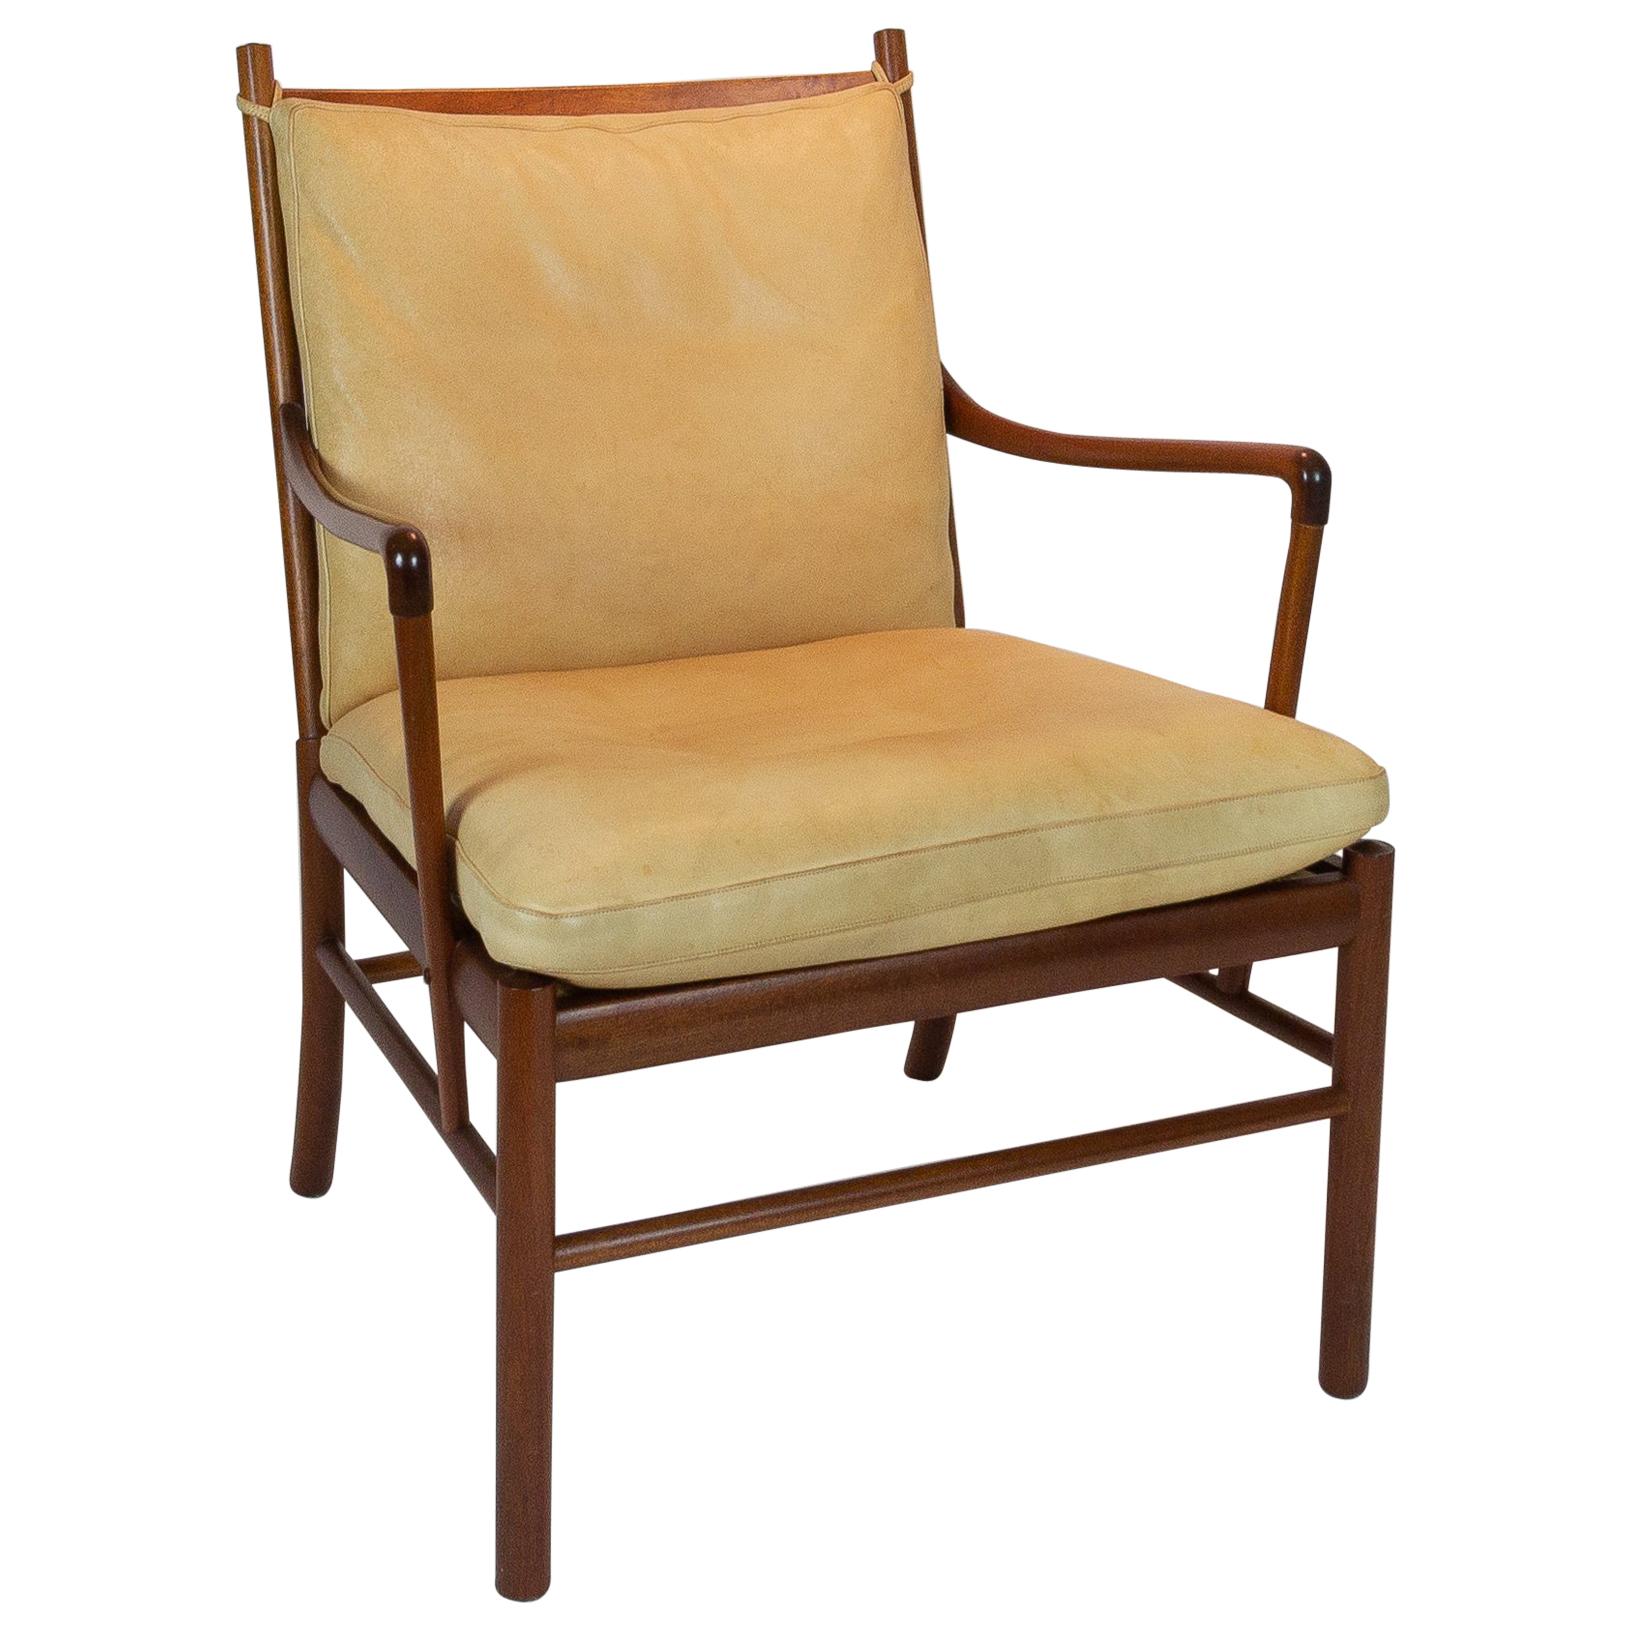 Mahogany and Cream Leather Colonial Chair by Ole Wanscher for Poul Jeppesen